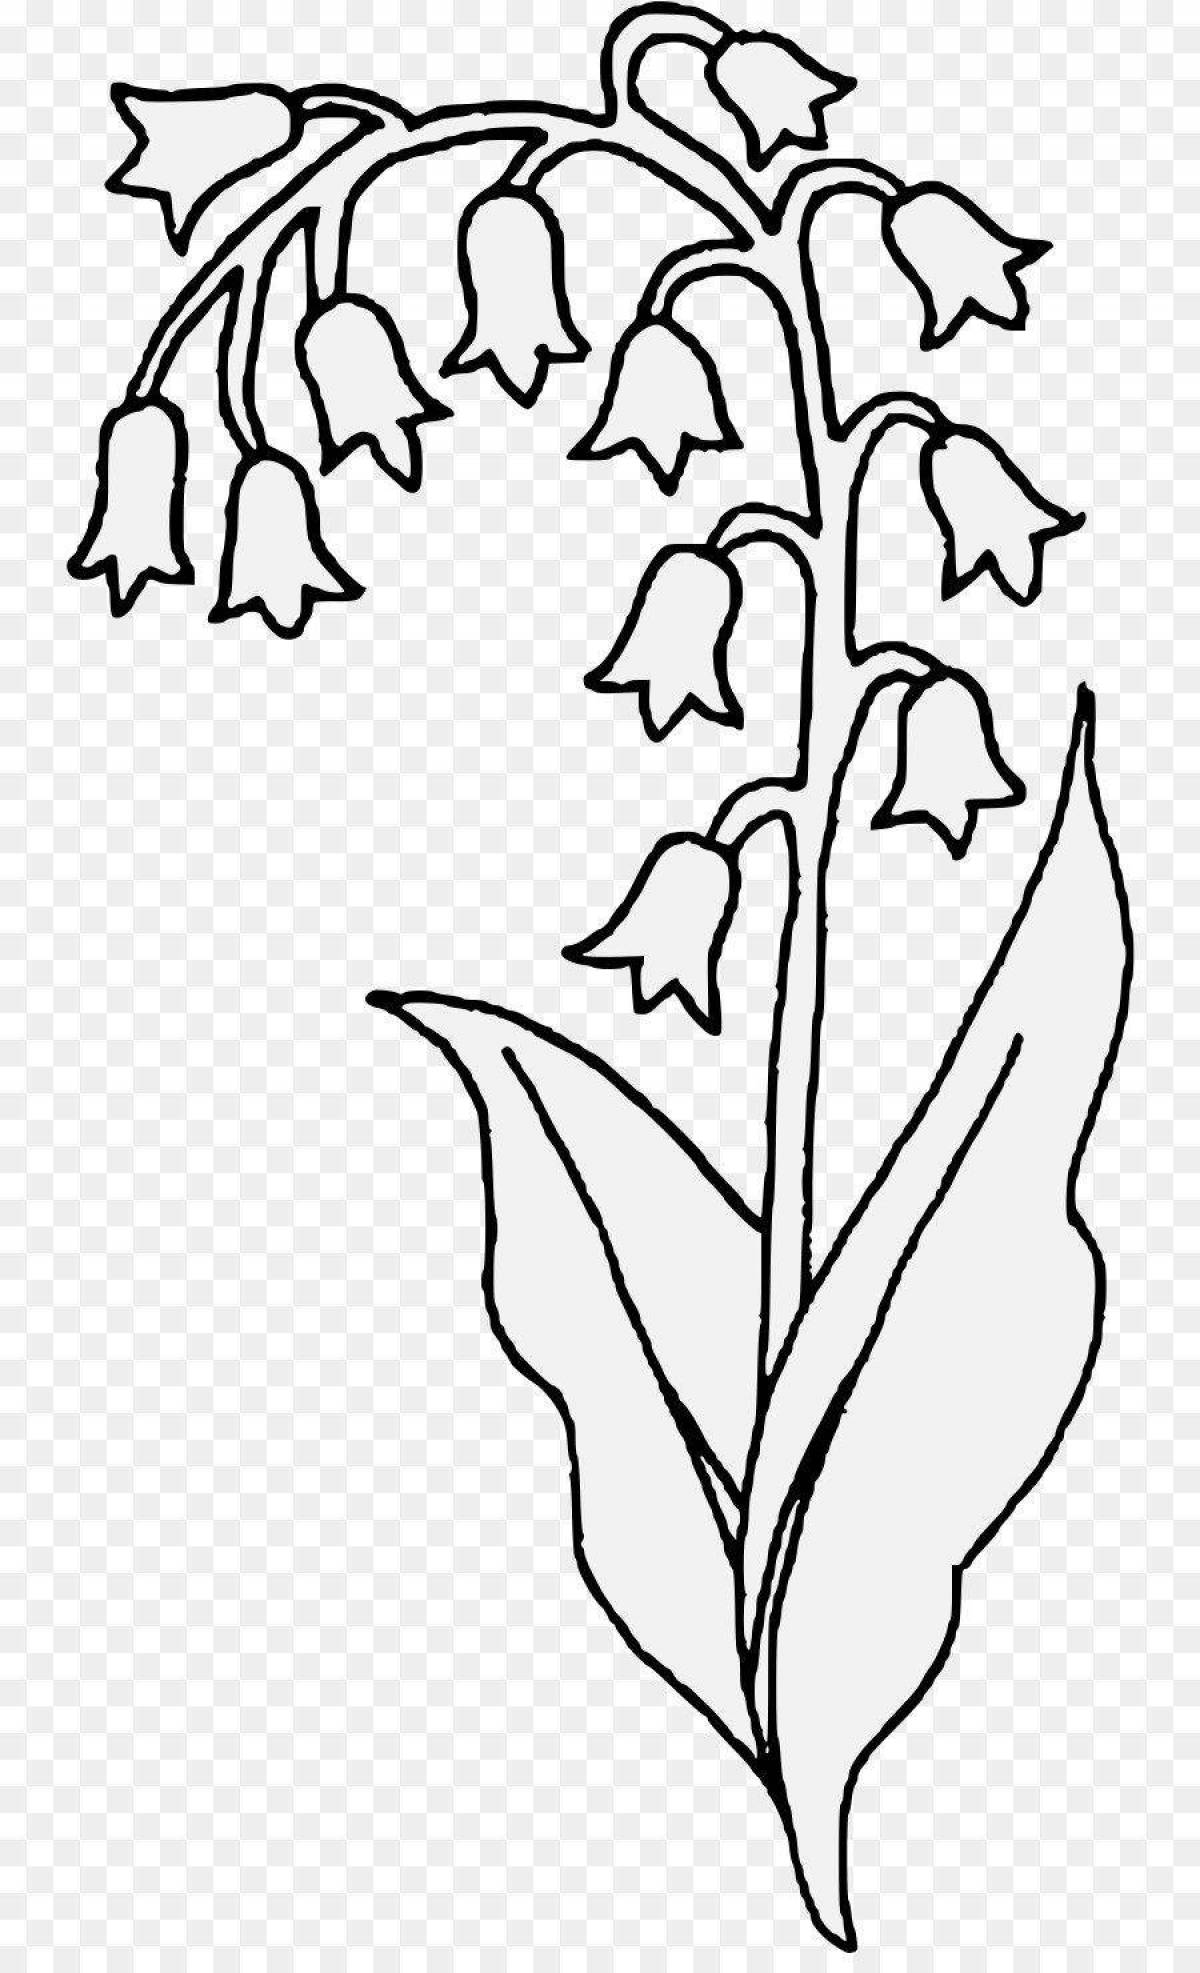 Adorable bluebell flower coloring page